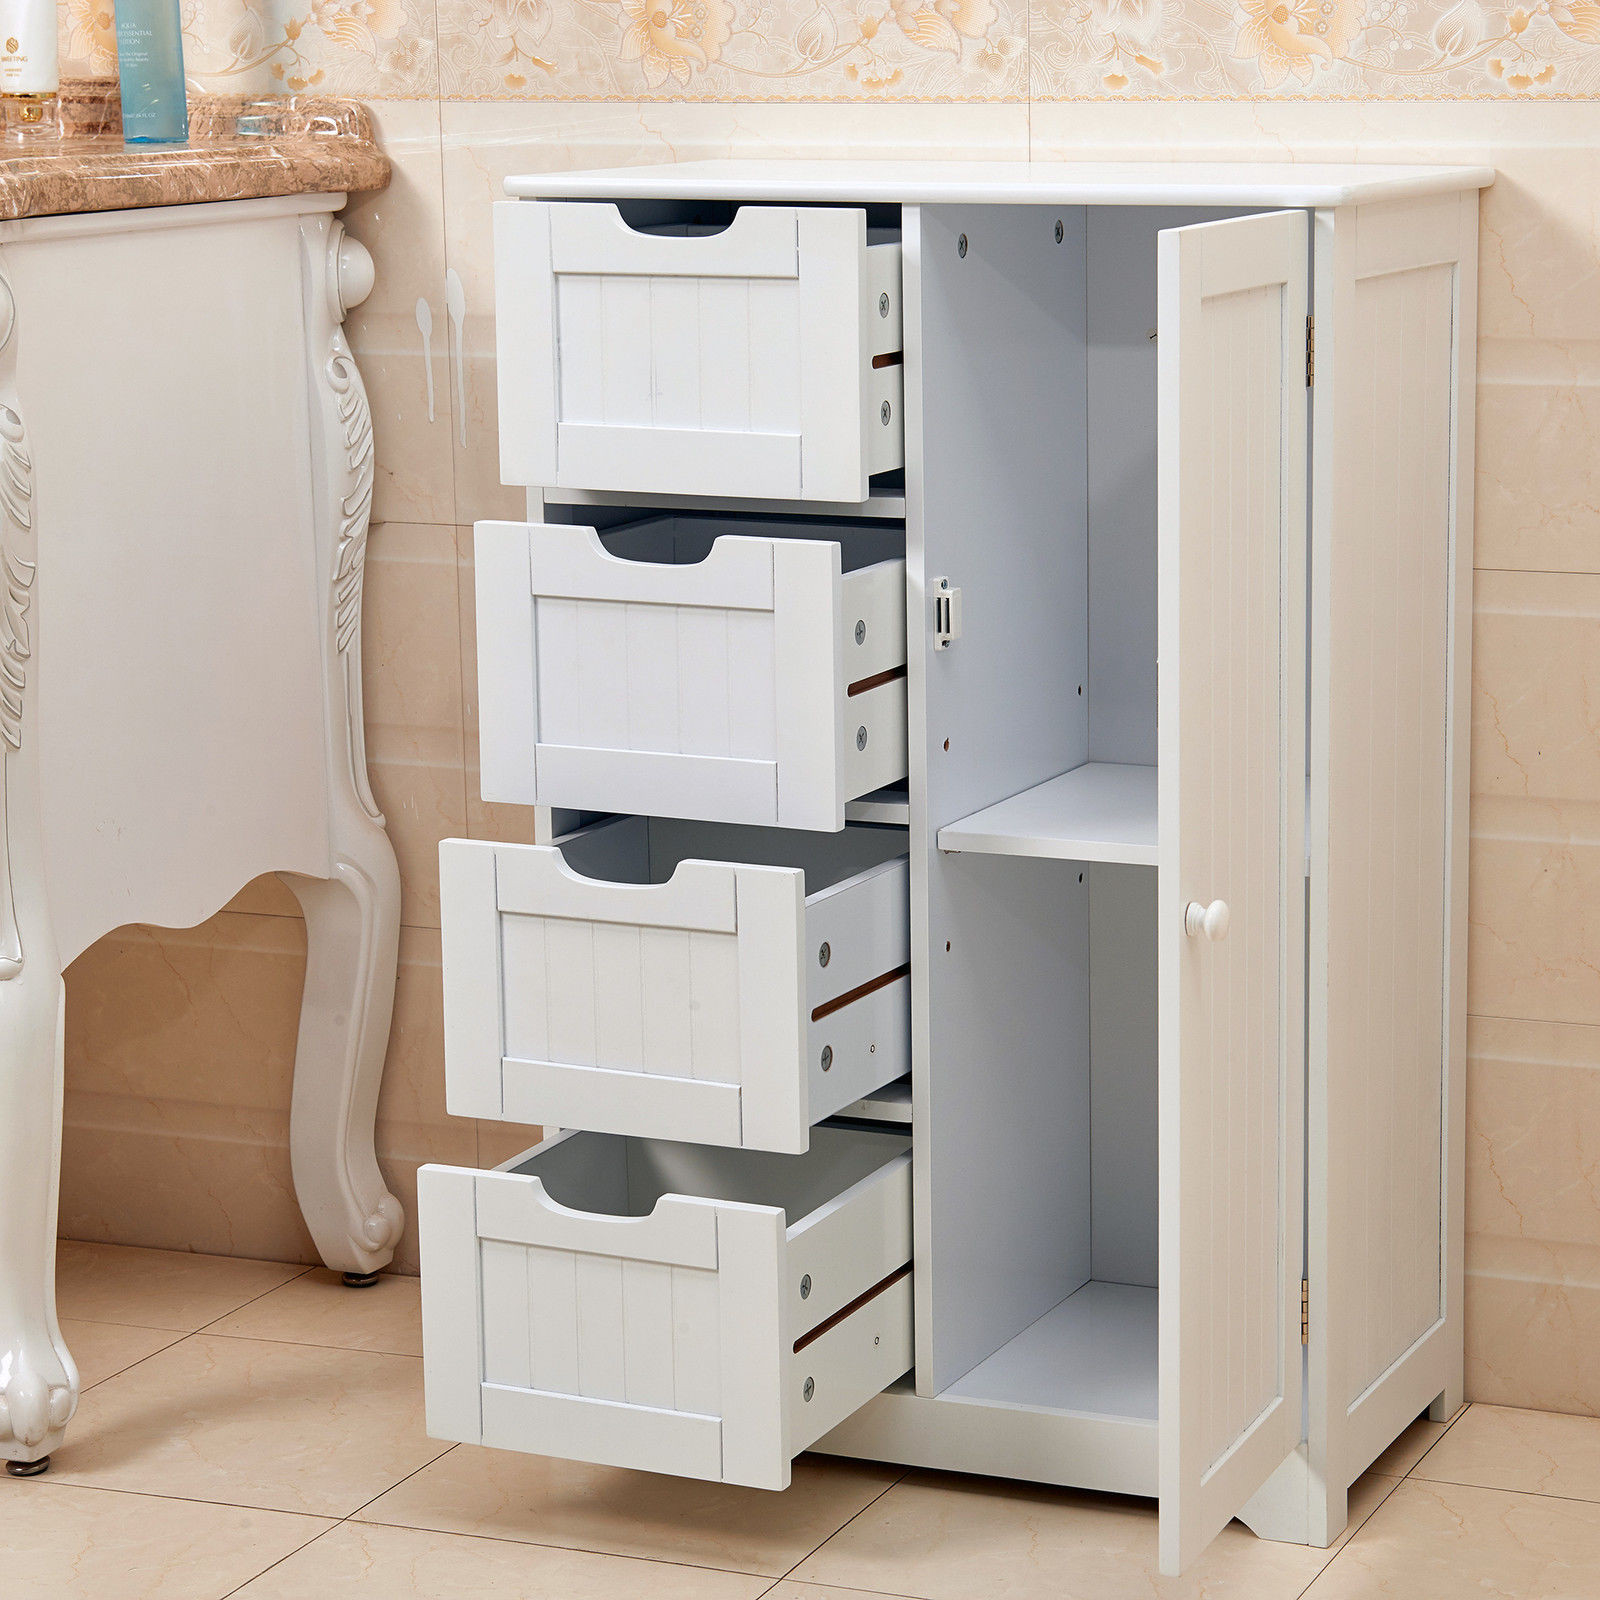 Bathroom Storage Cabinet With Drawers
 White Wooden 4 Drawer Bathroom Storage Cupboard Cabinet